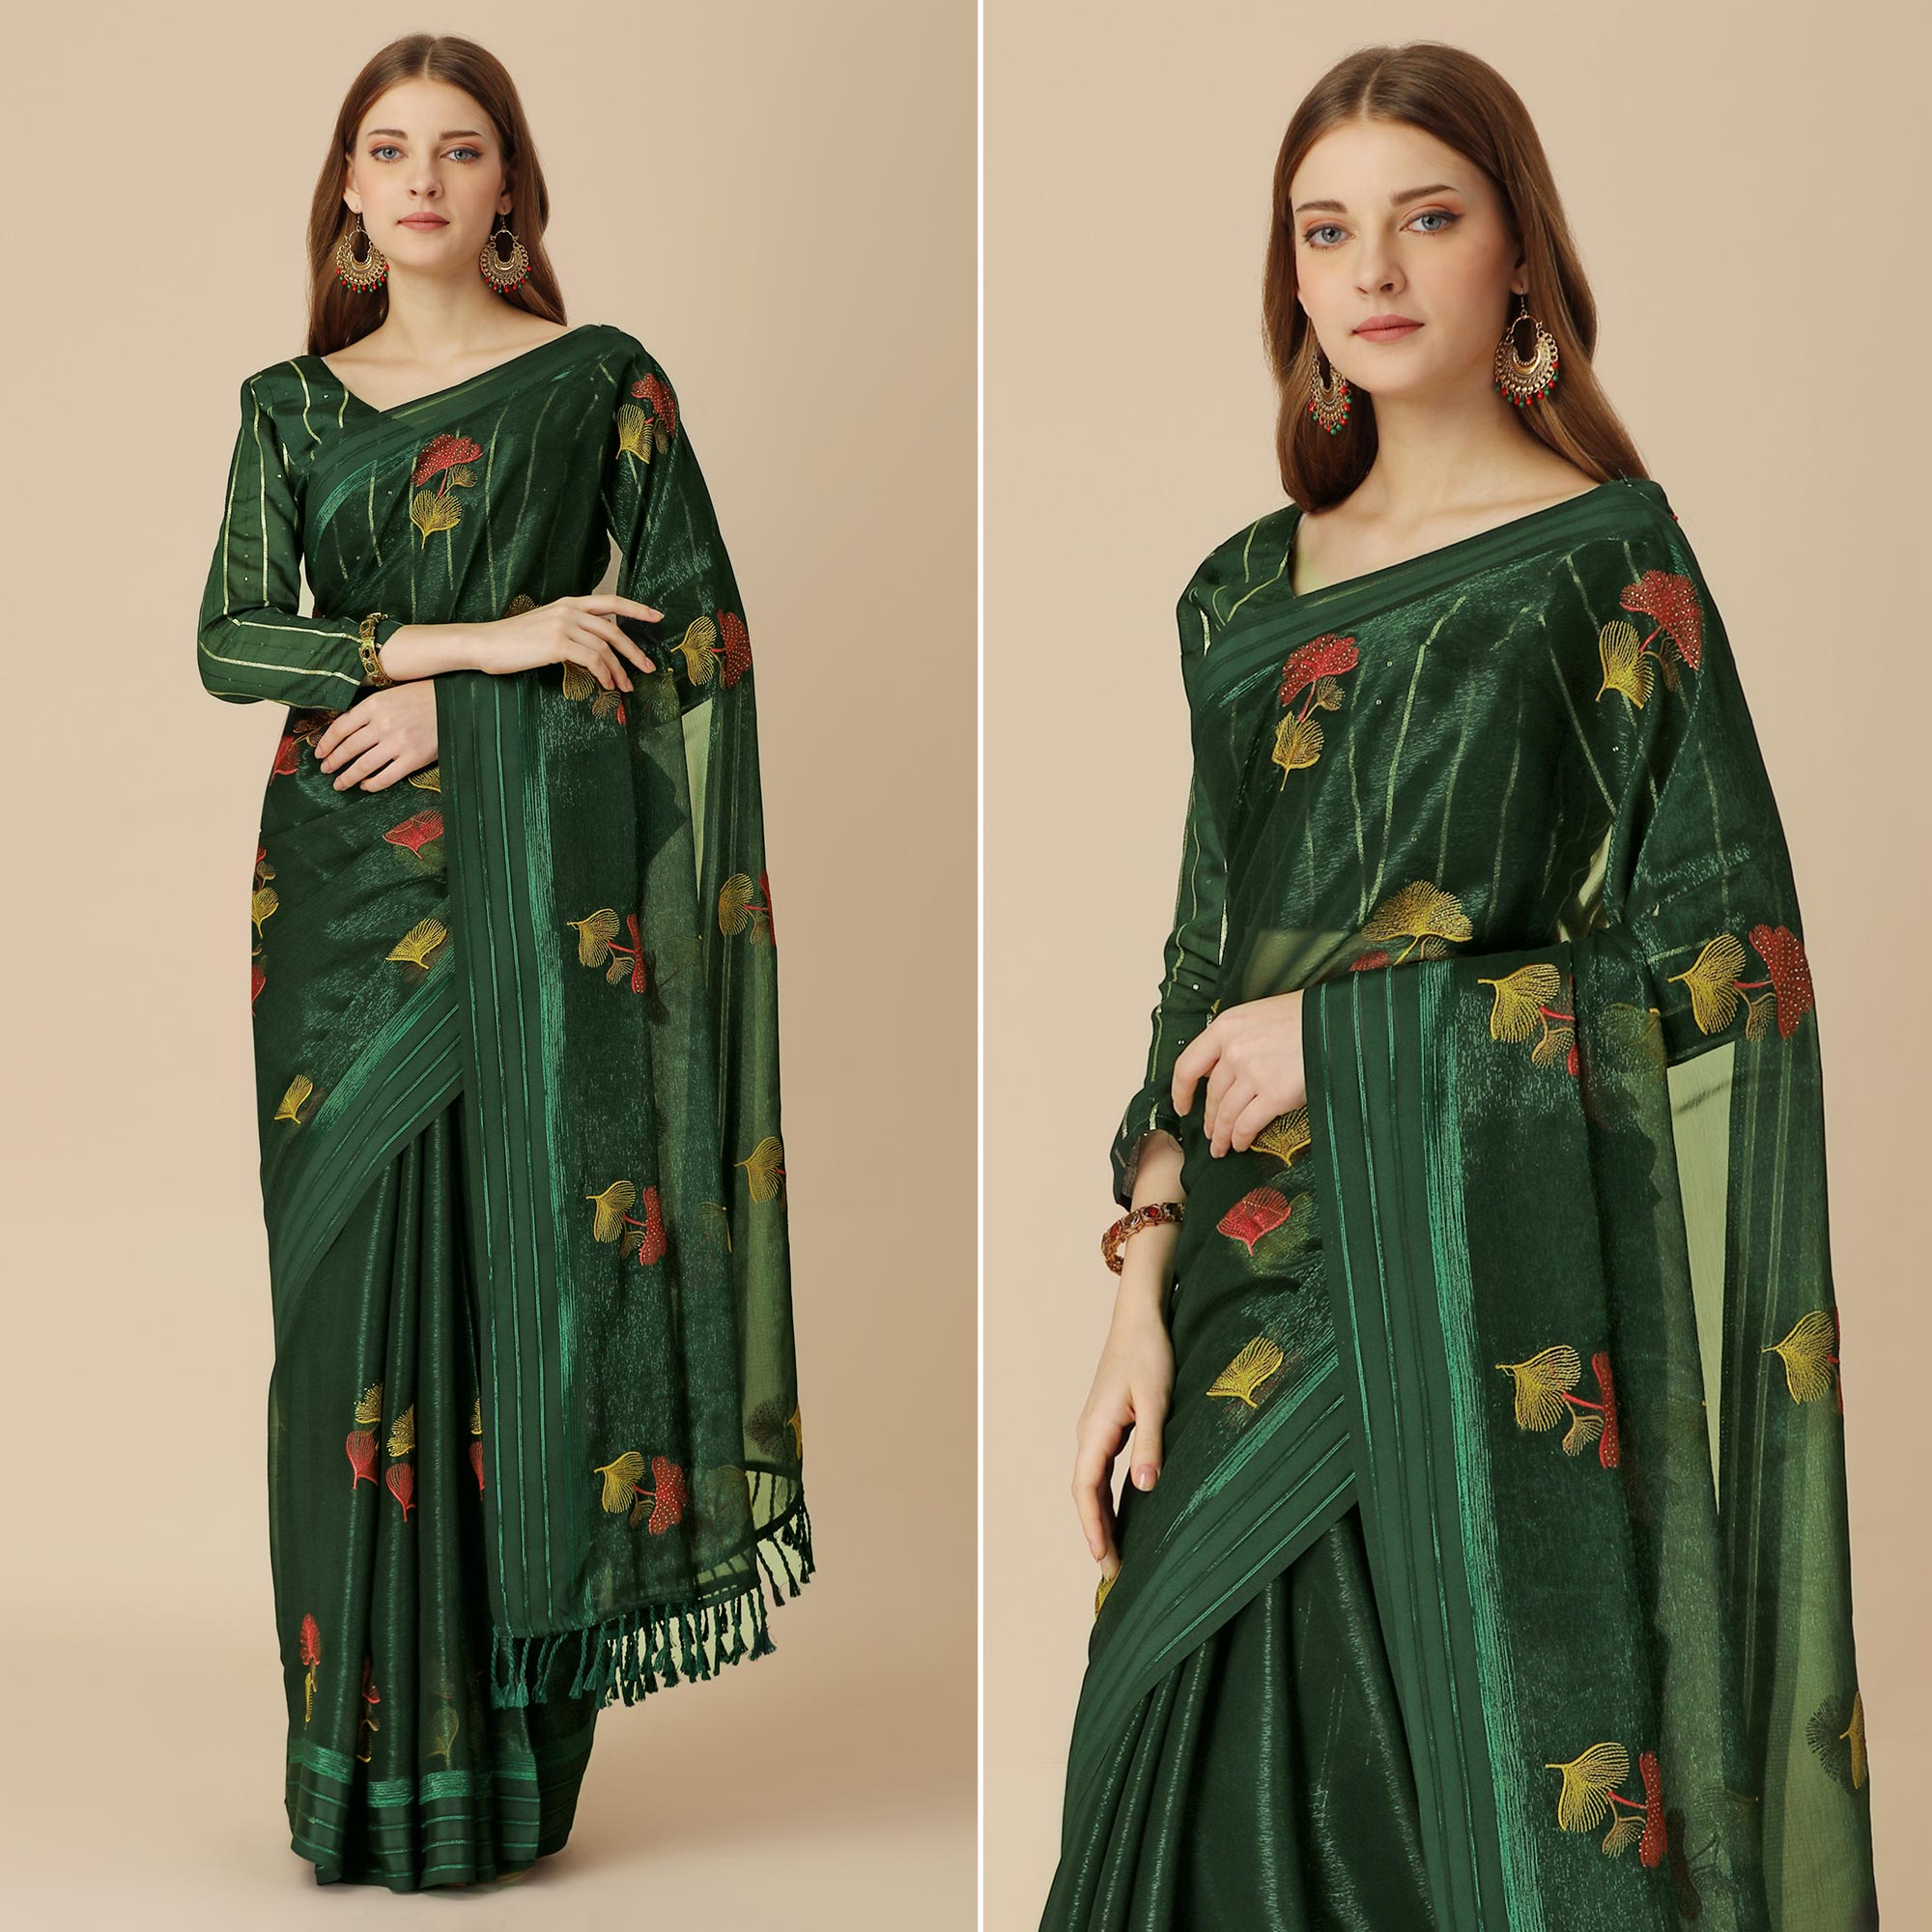 Green Floral Embroidered Chiffon Saree With With Tassels